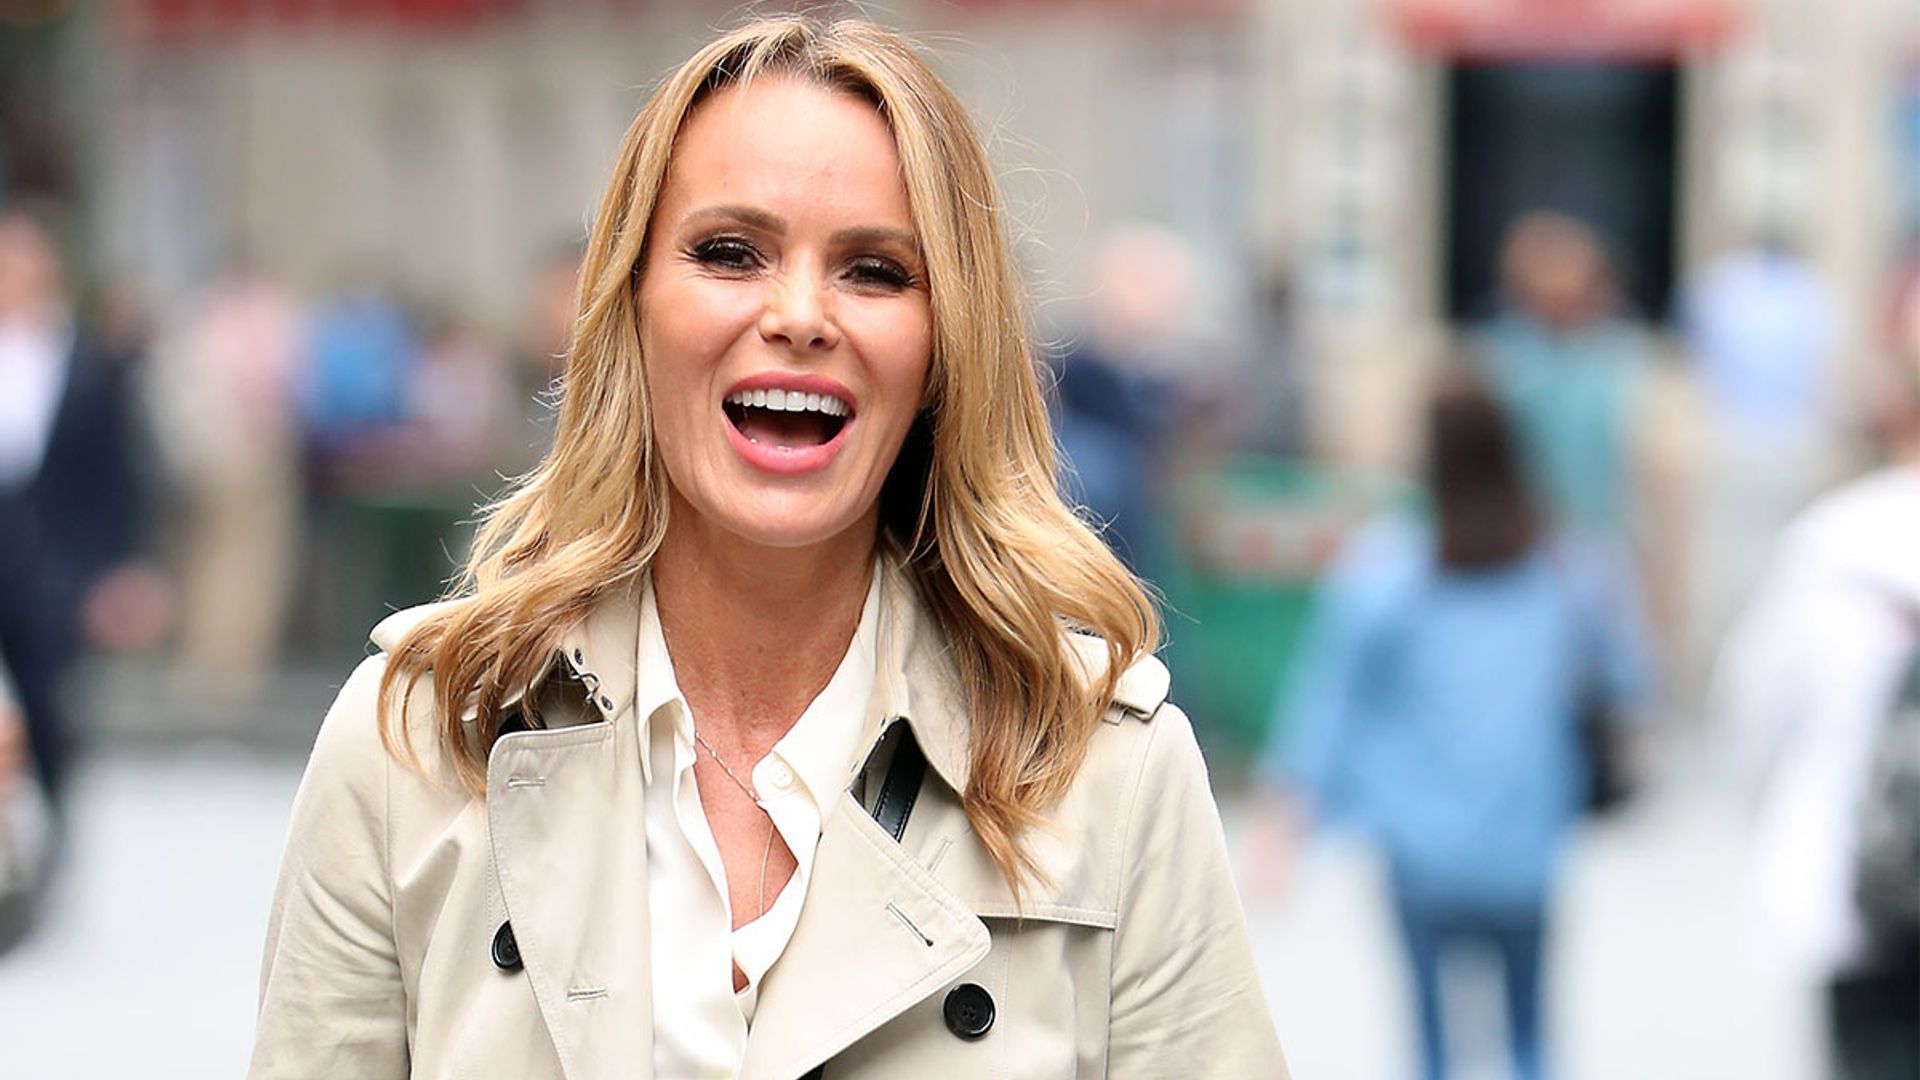 Amanda Holden earns her stripes in fabulous navy Massimo Dutti trousers